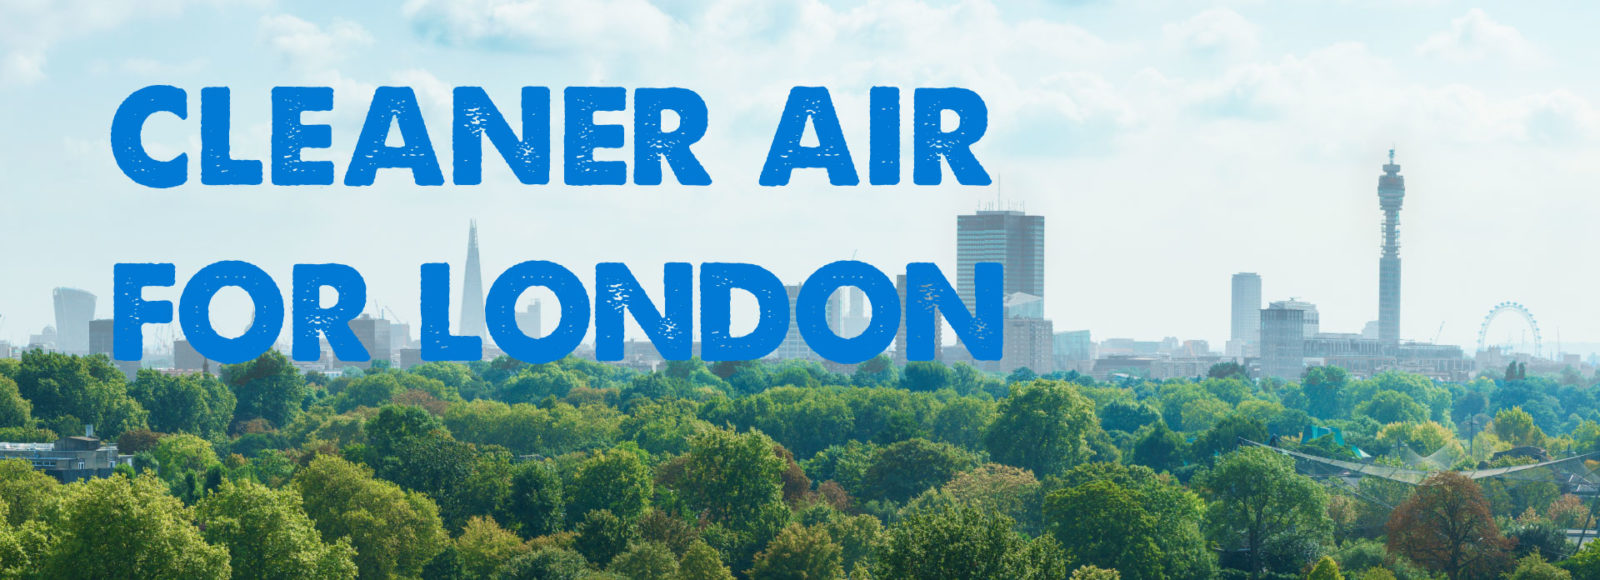 Cleaner Air for London